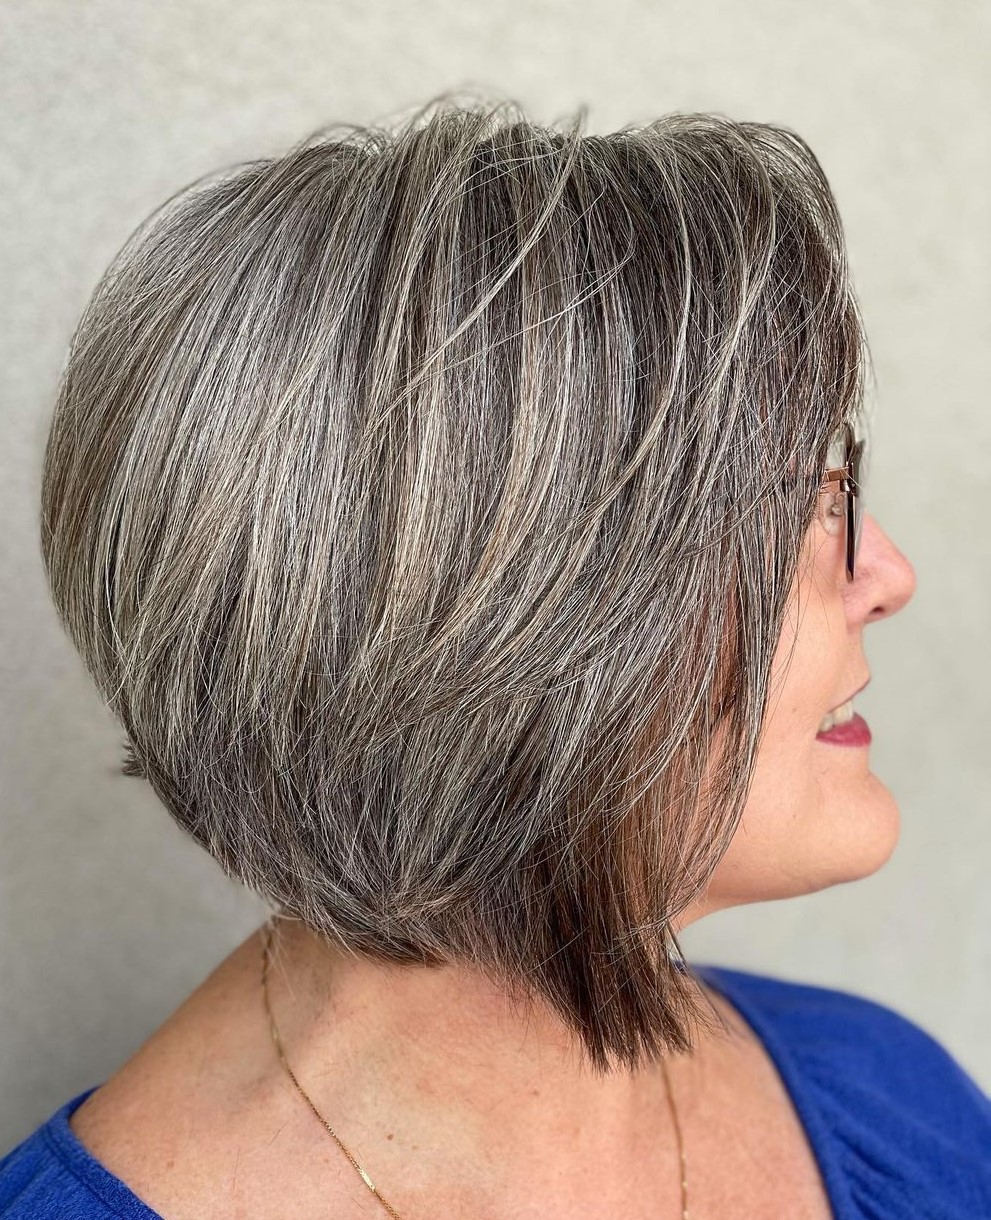 30 Low Maintenance Haircuts for Women Over 50 – The Right Hairstyles